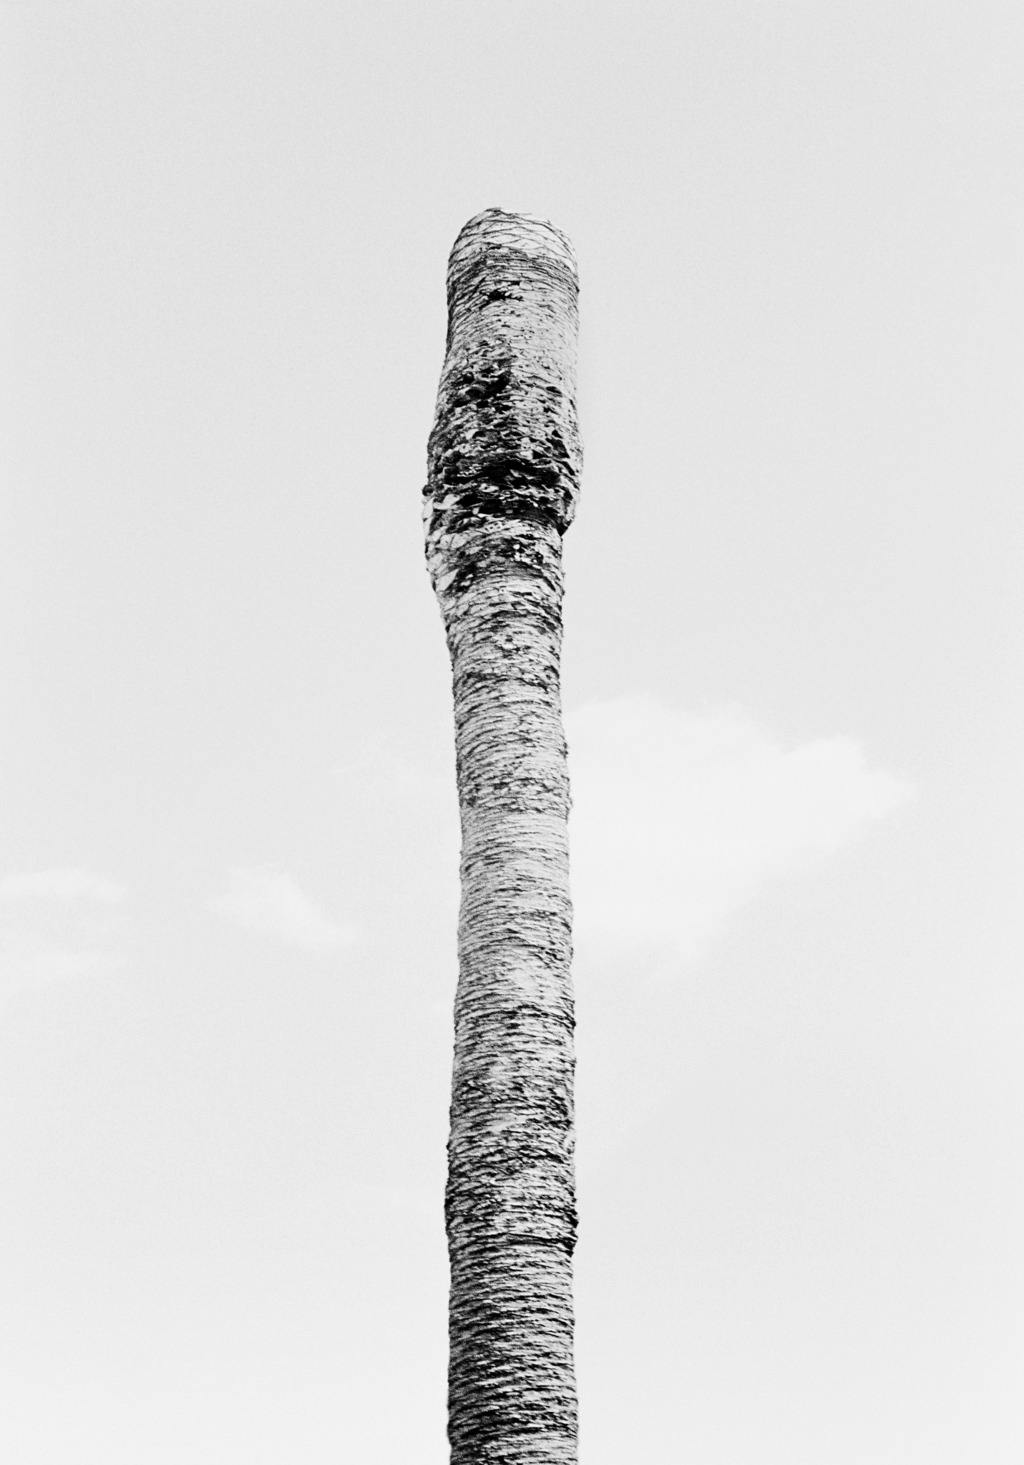 Photograph 1 of the "TOTEMIC COLUMN" collection (part 2)